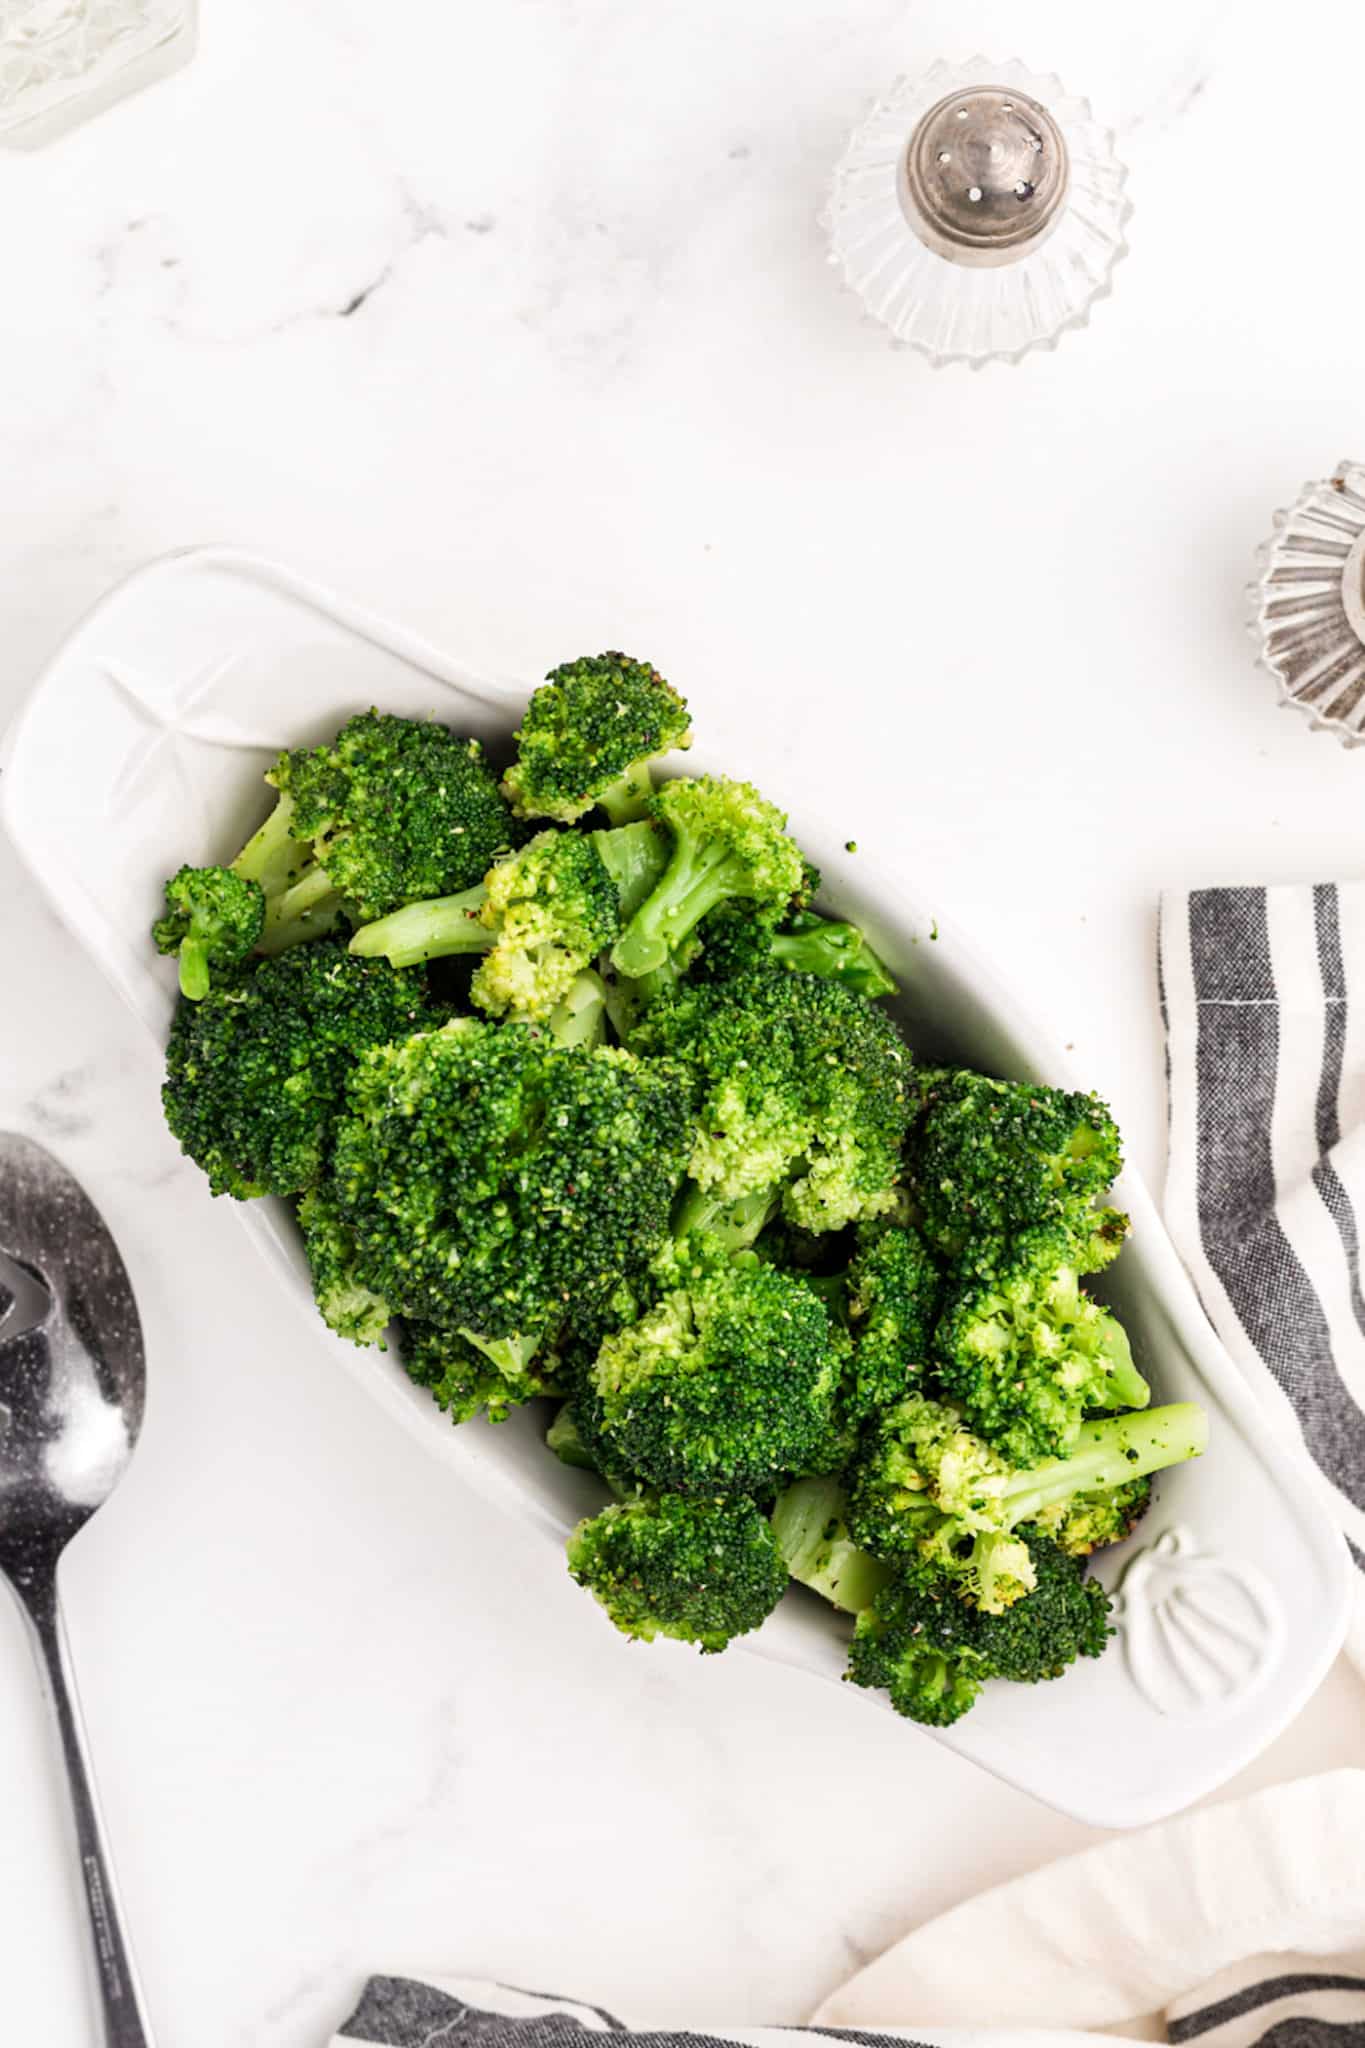 cooked broccoli on a table with salt and pepper shakers